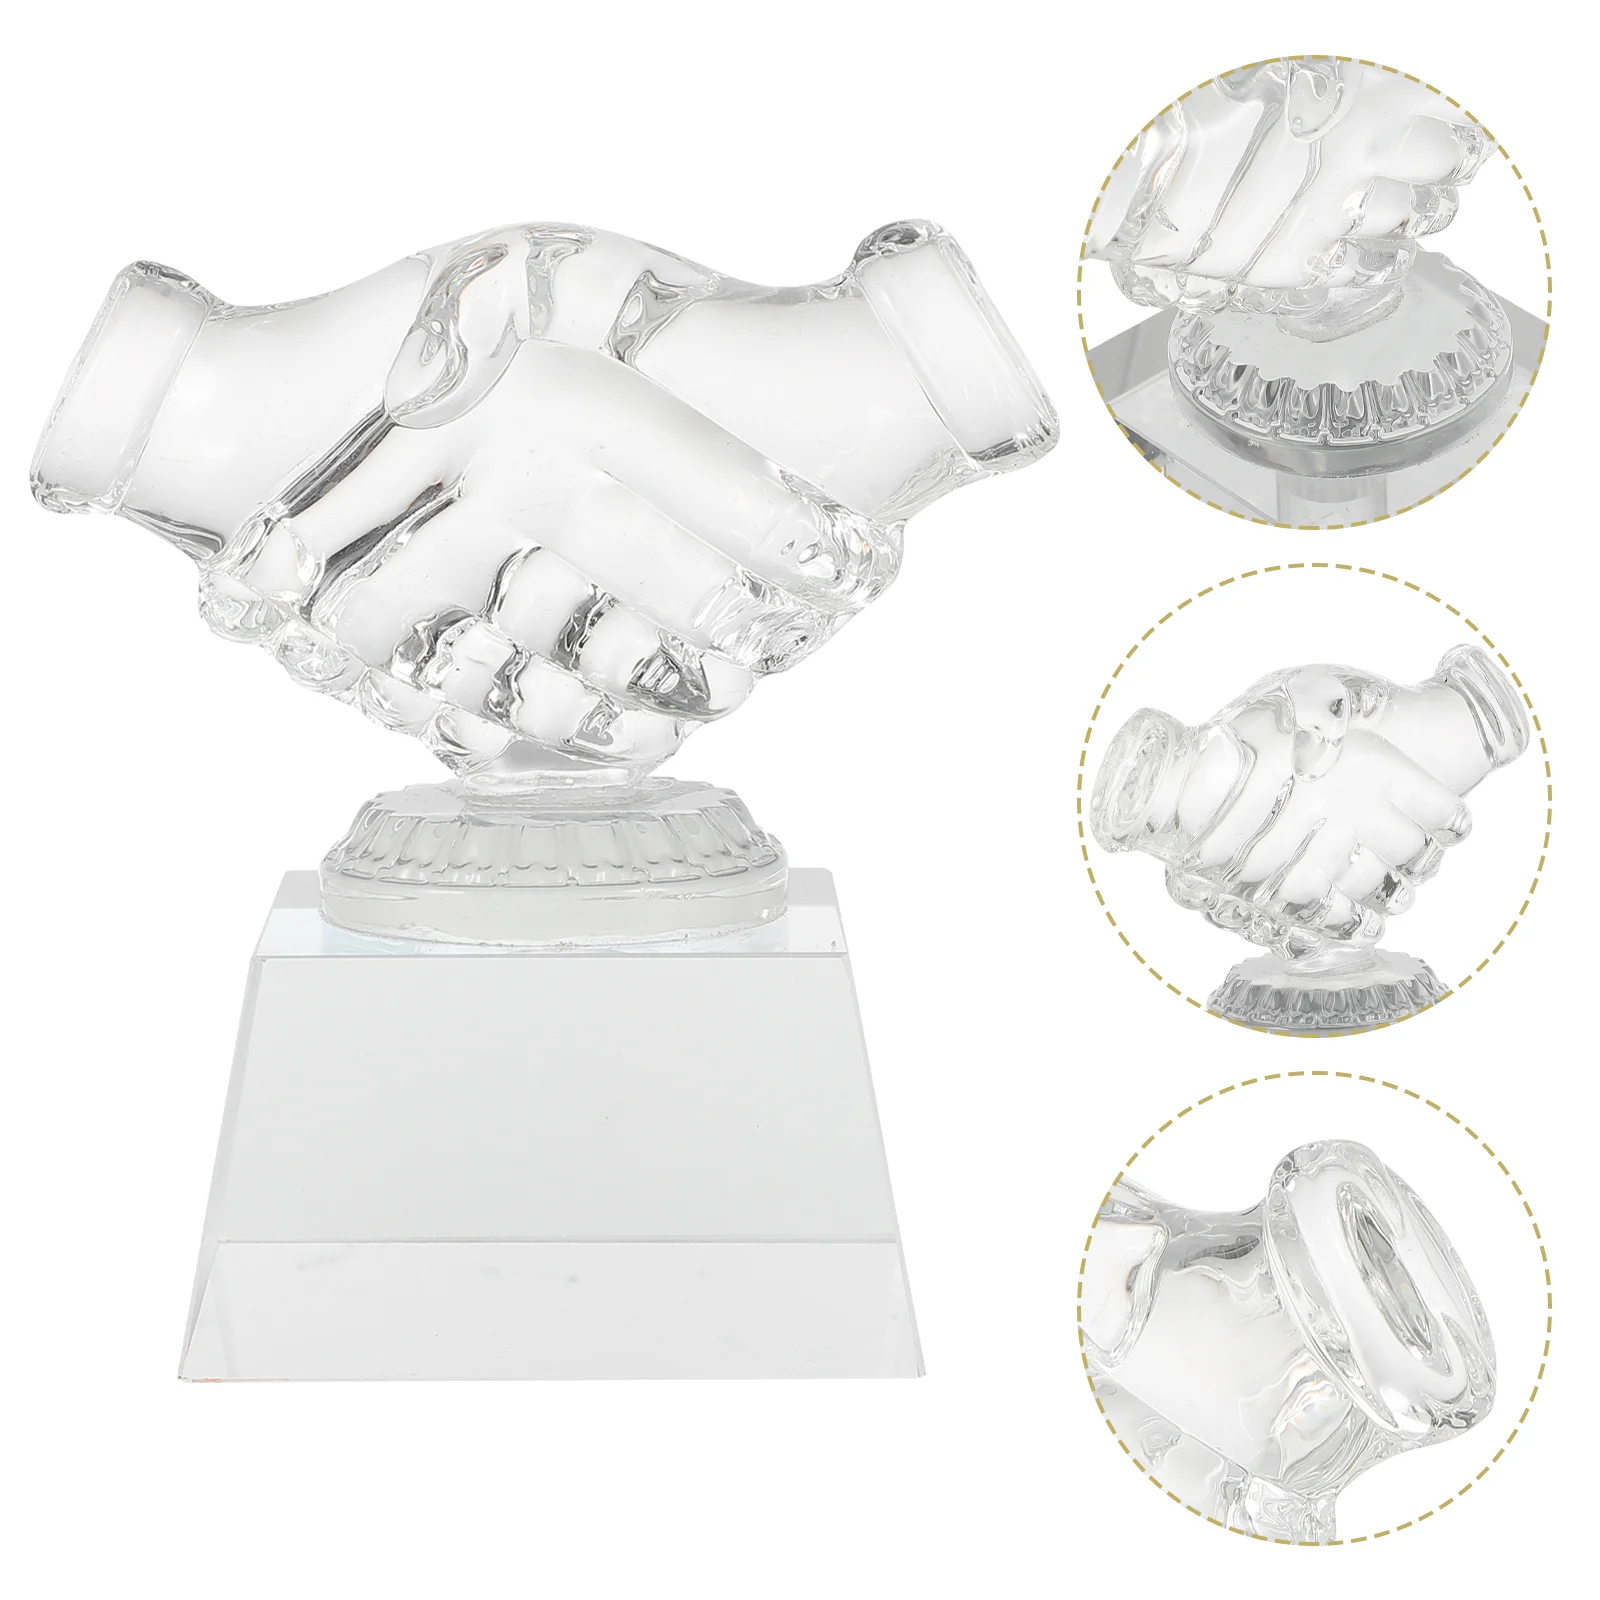 

Trophy Medal Sports Decor Hand-shaped Award Mini Supply Decorative Crystal Transparent Prize Child Delicate